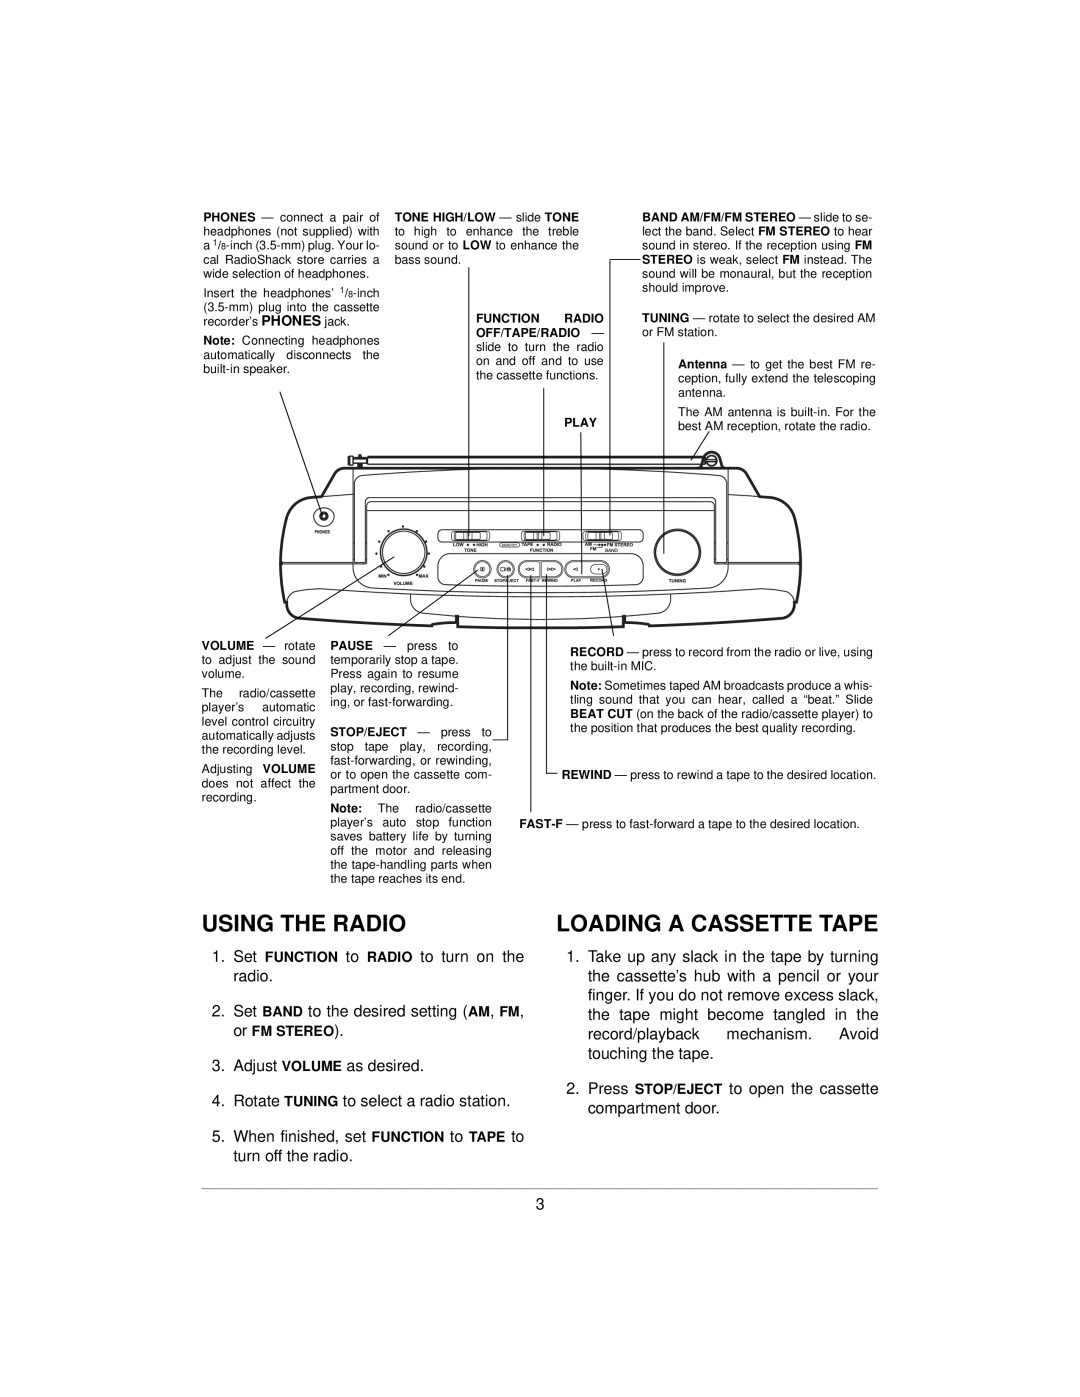 Radio Shack SCR-64 specifications Using The Radio, Loading A Cassette Tape, Set FUNCTION to RADIO to turn on the radio 